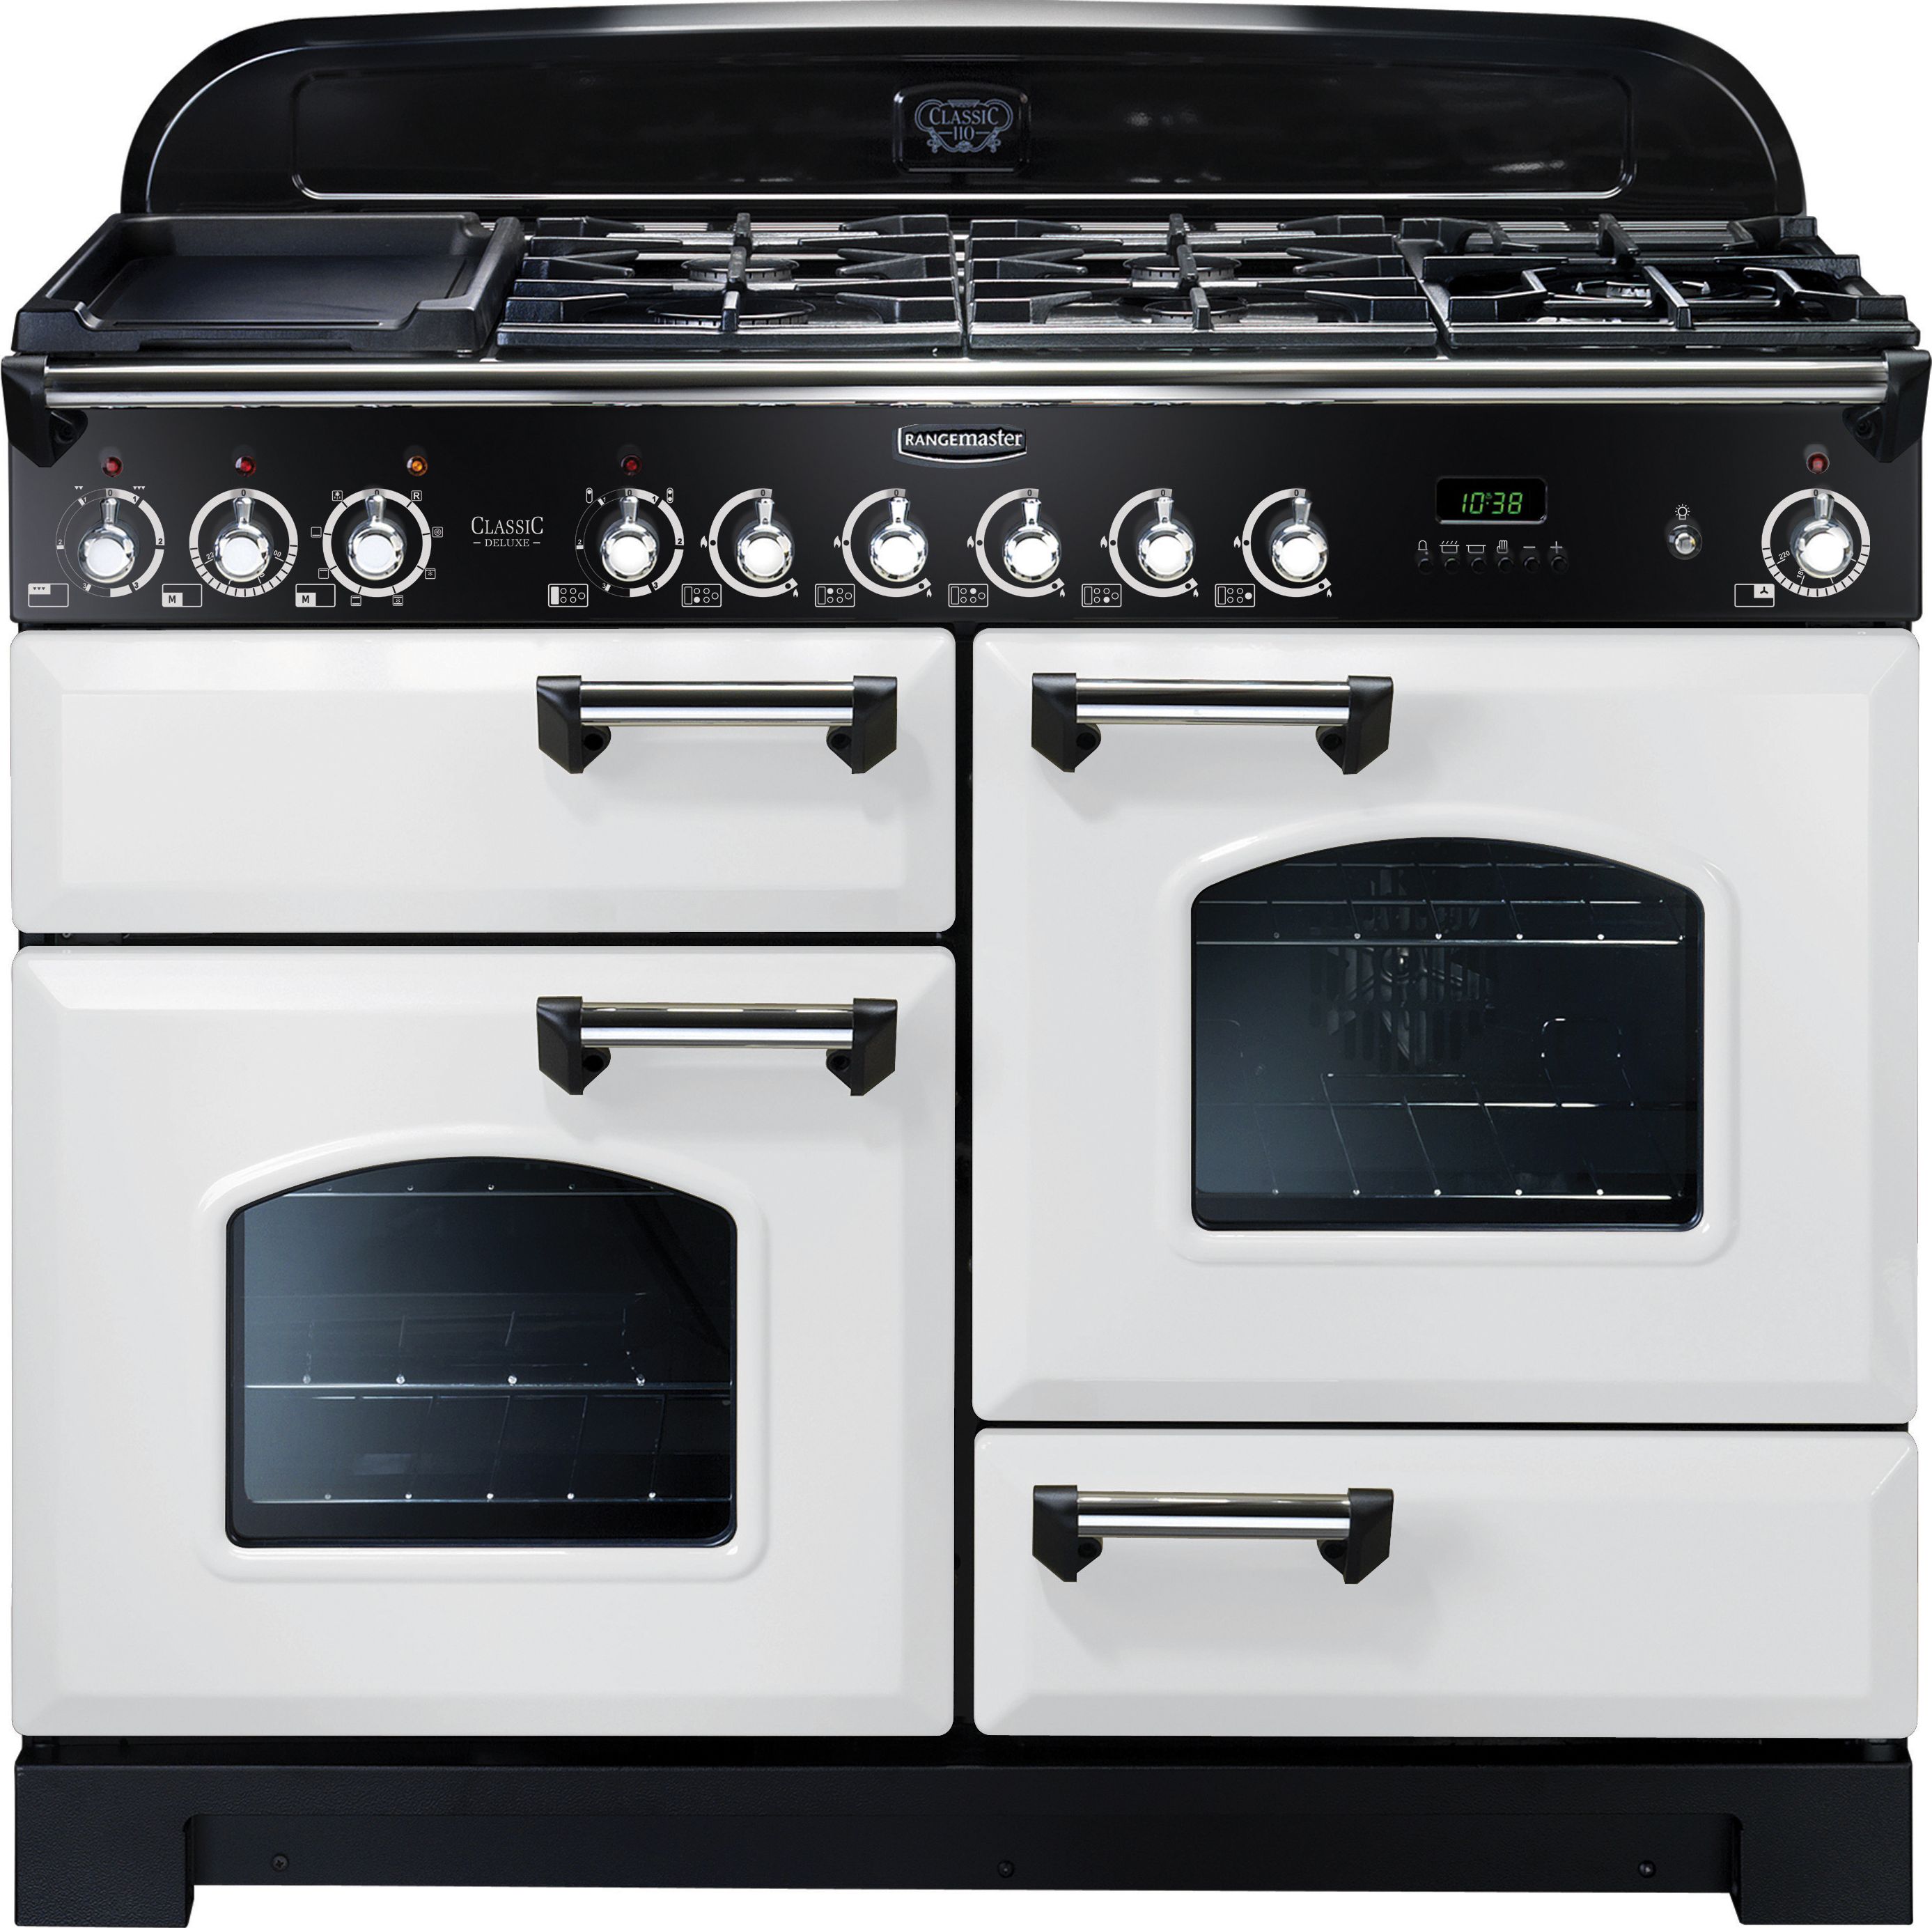 Rangemaster Classic Deluxe CDL110DFFWH/C 110cm Dual Fuel Range Cooker - White / Chrome - A/A Rated, White